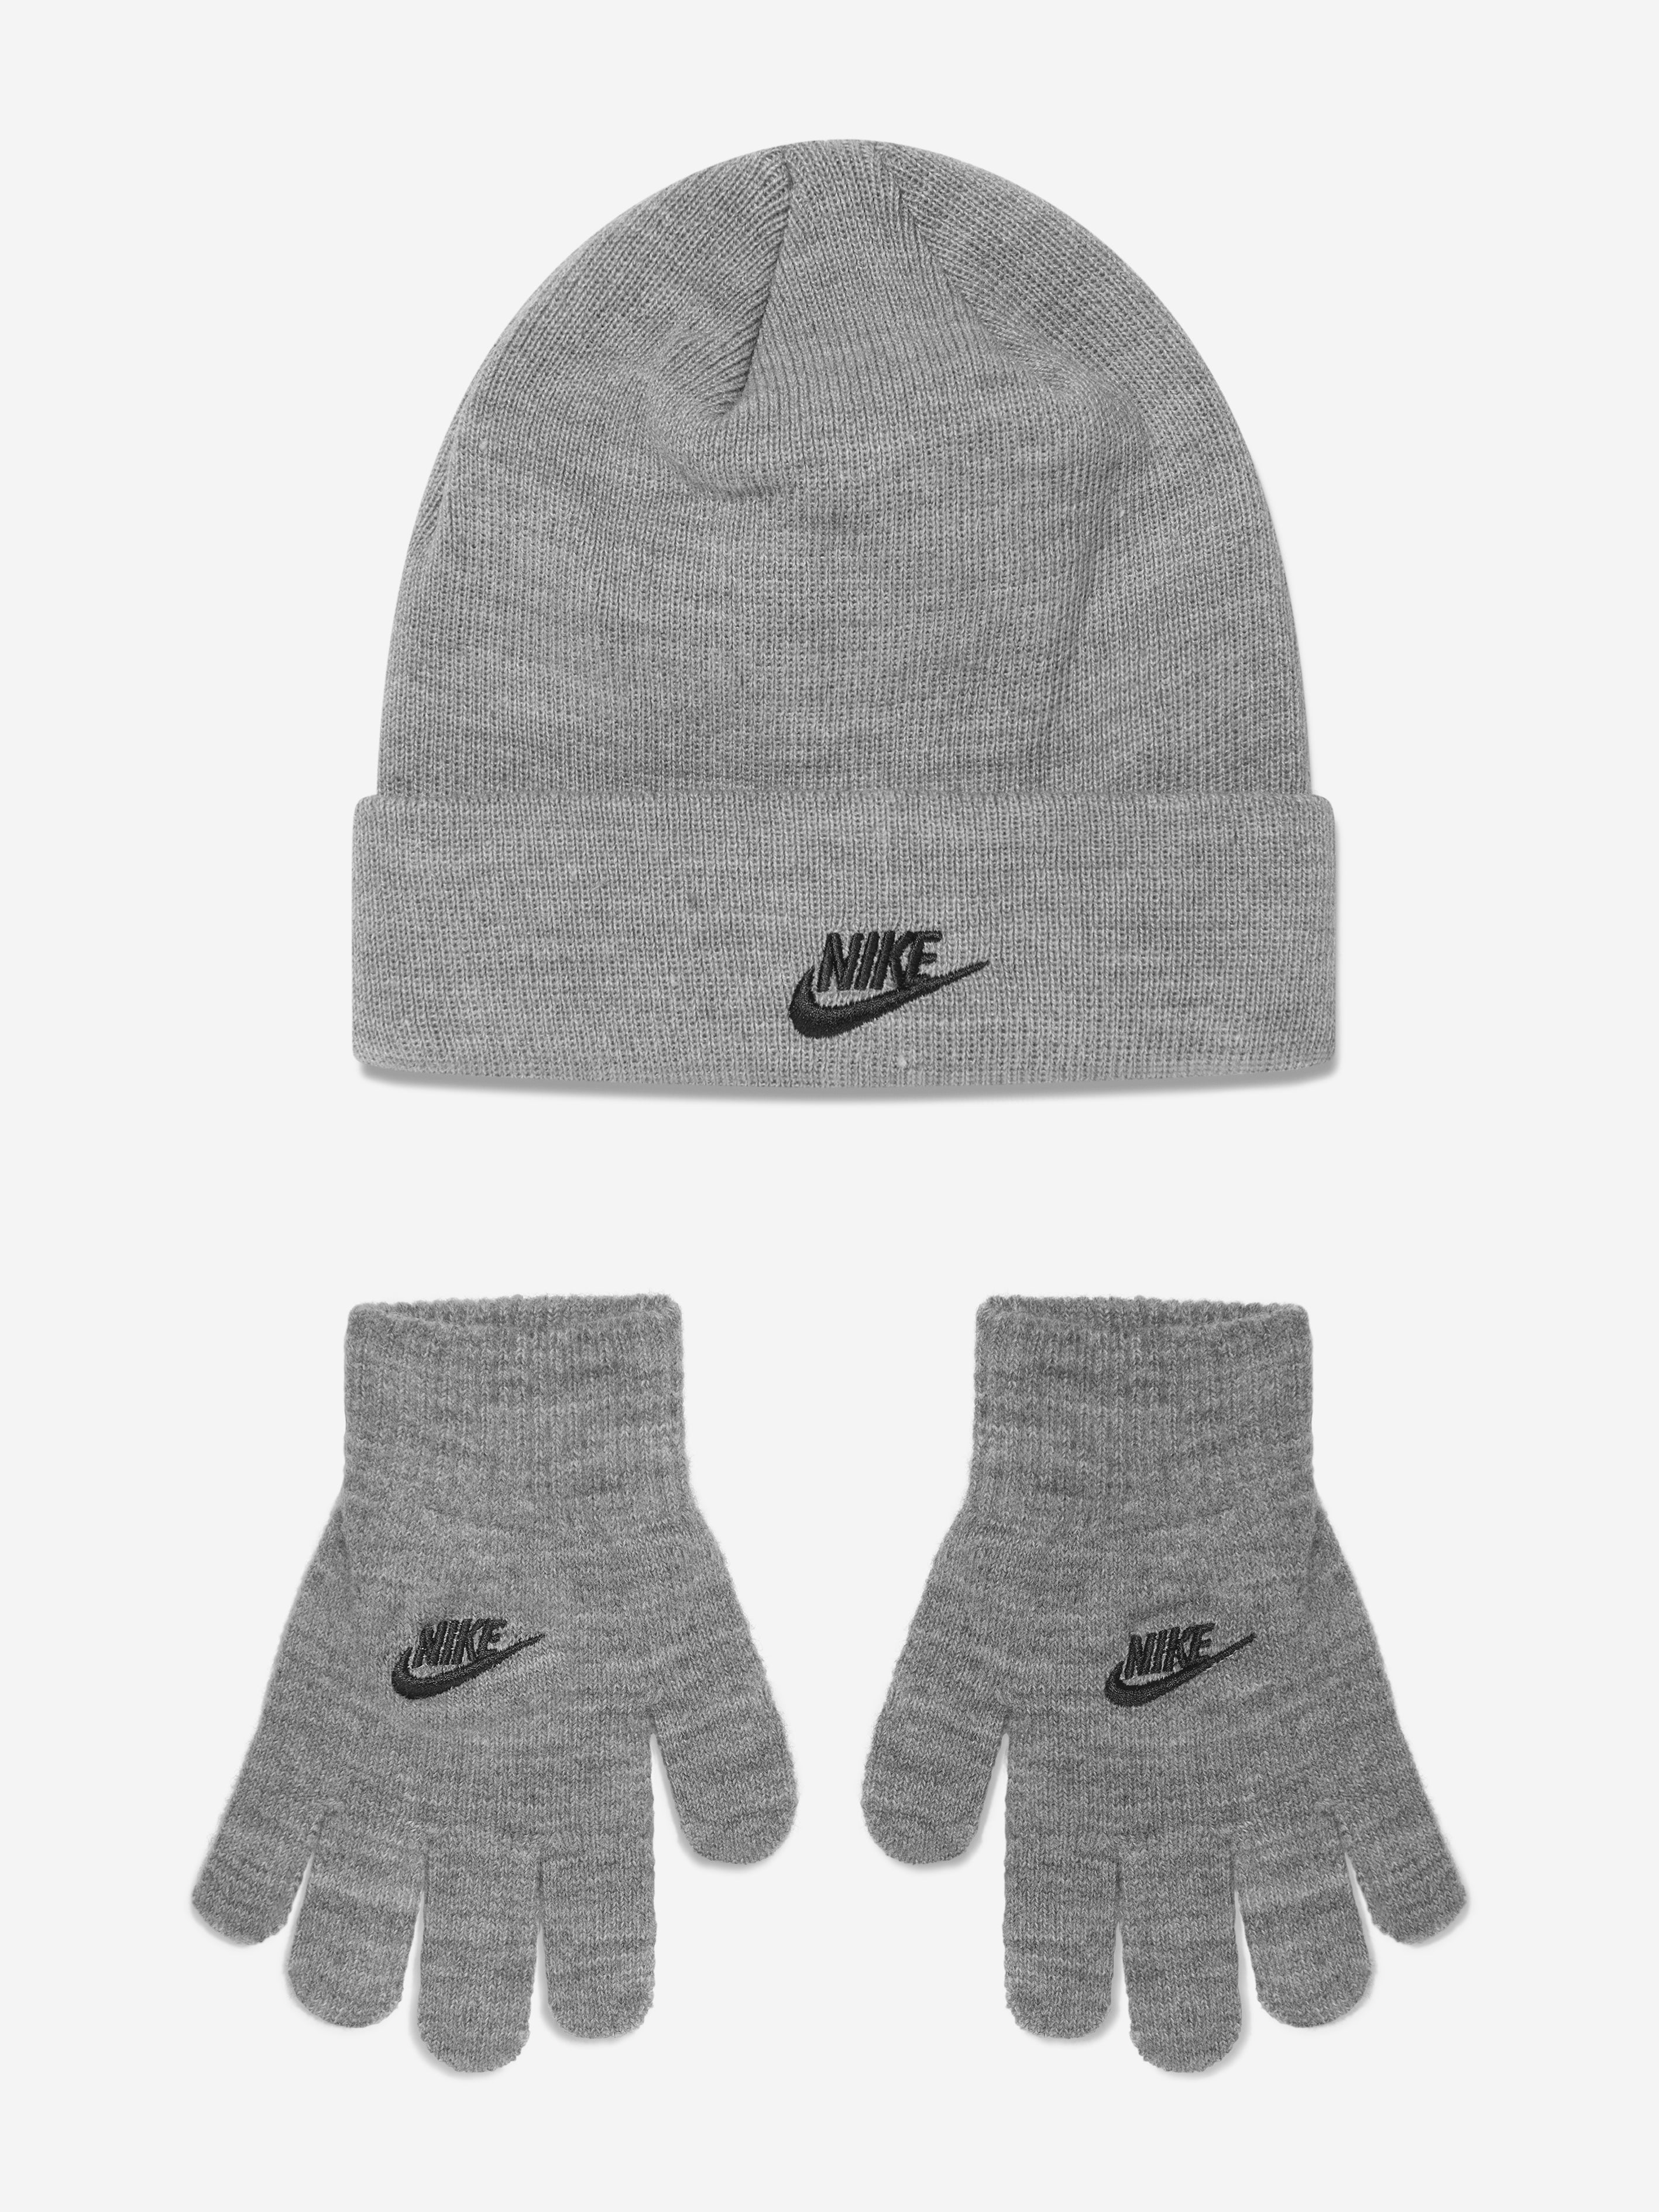 Futura Beanie Hat And Gloves Set in Grey | Clothing